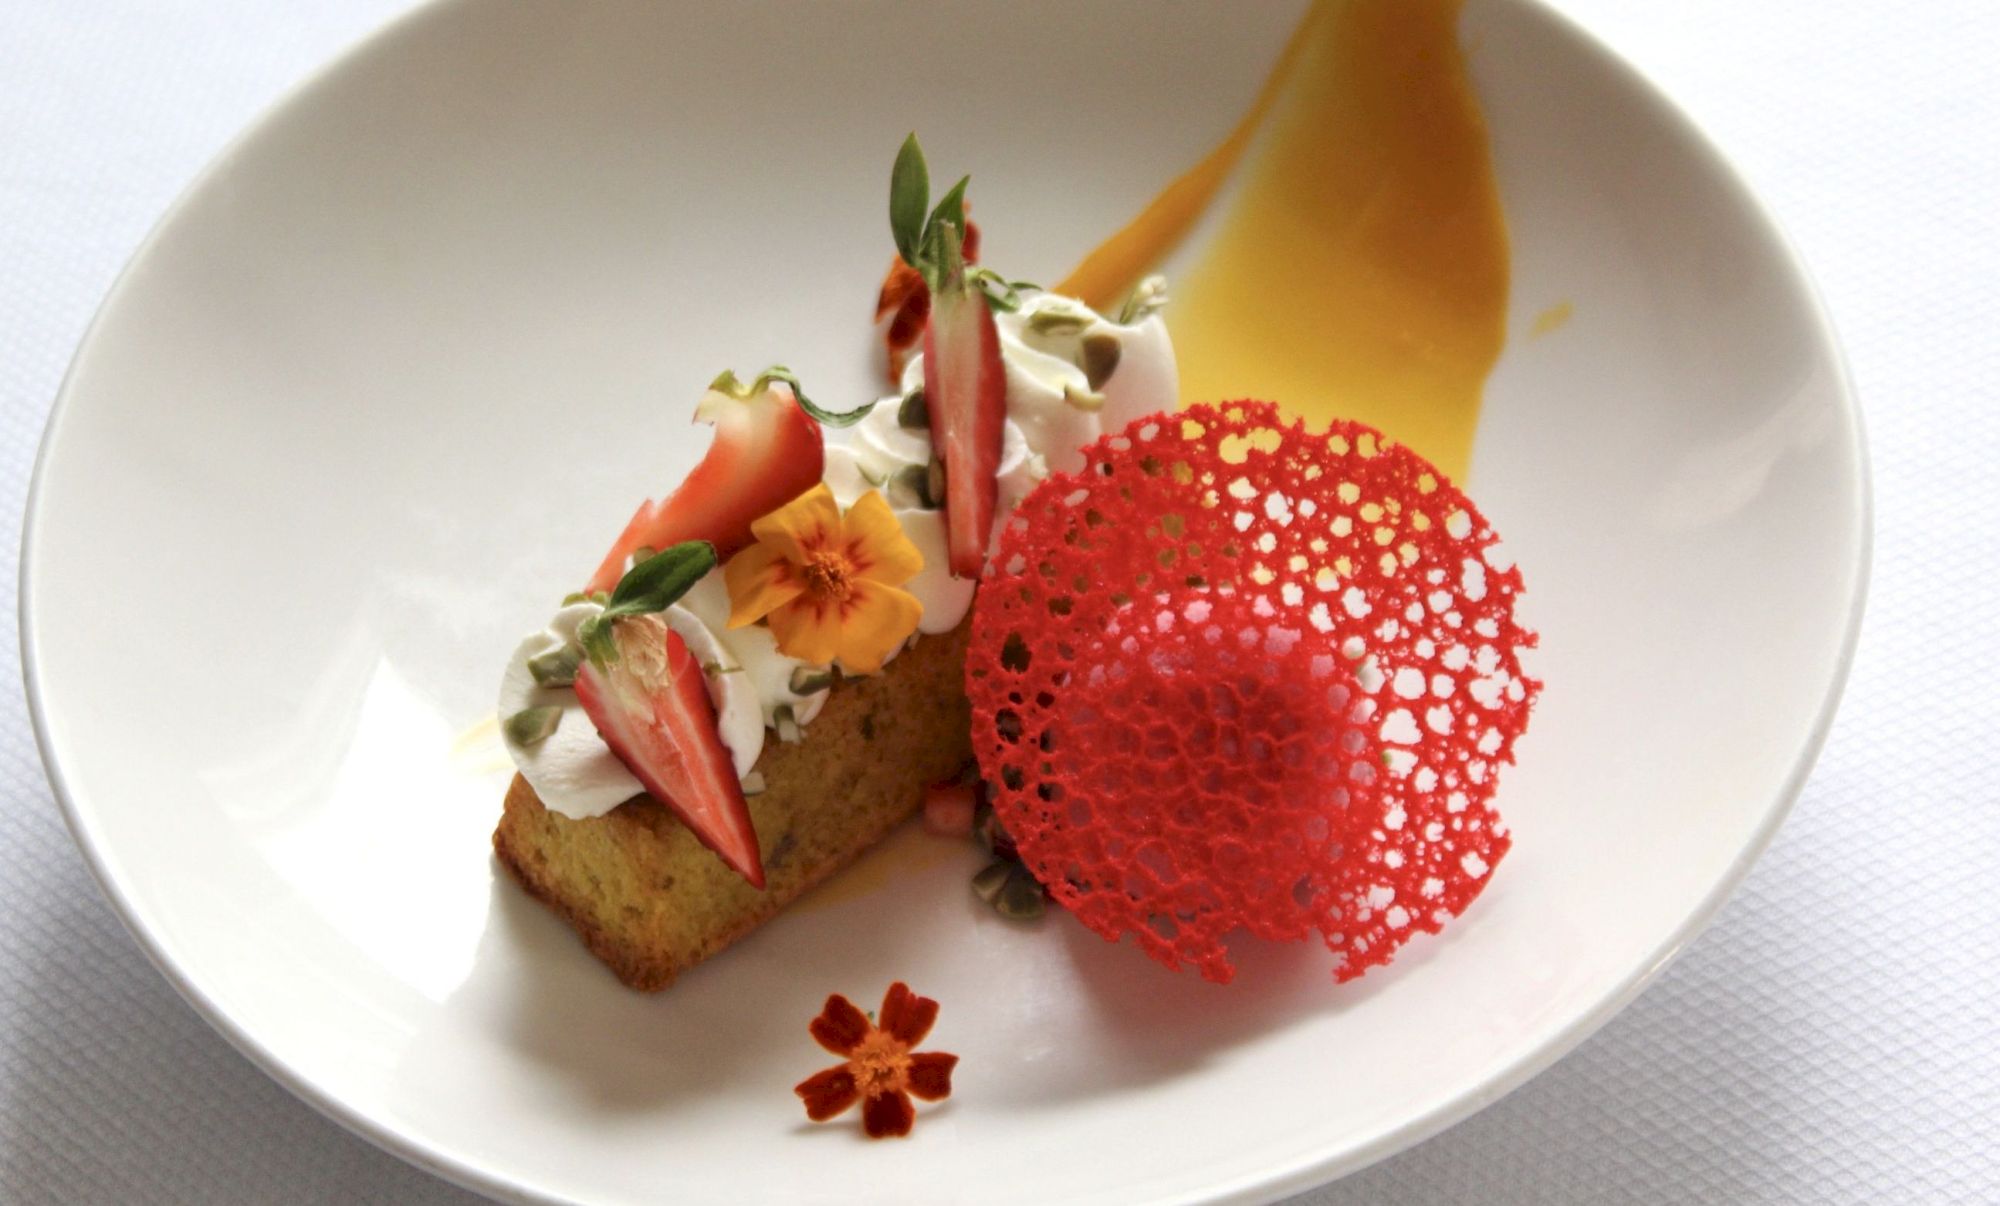 A dessert with cake, cream, fruit, edible flowers and a crisp tuile.